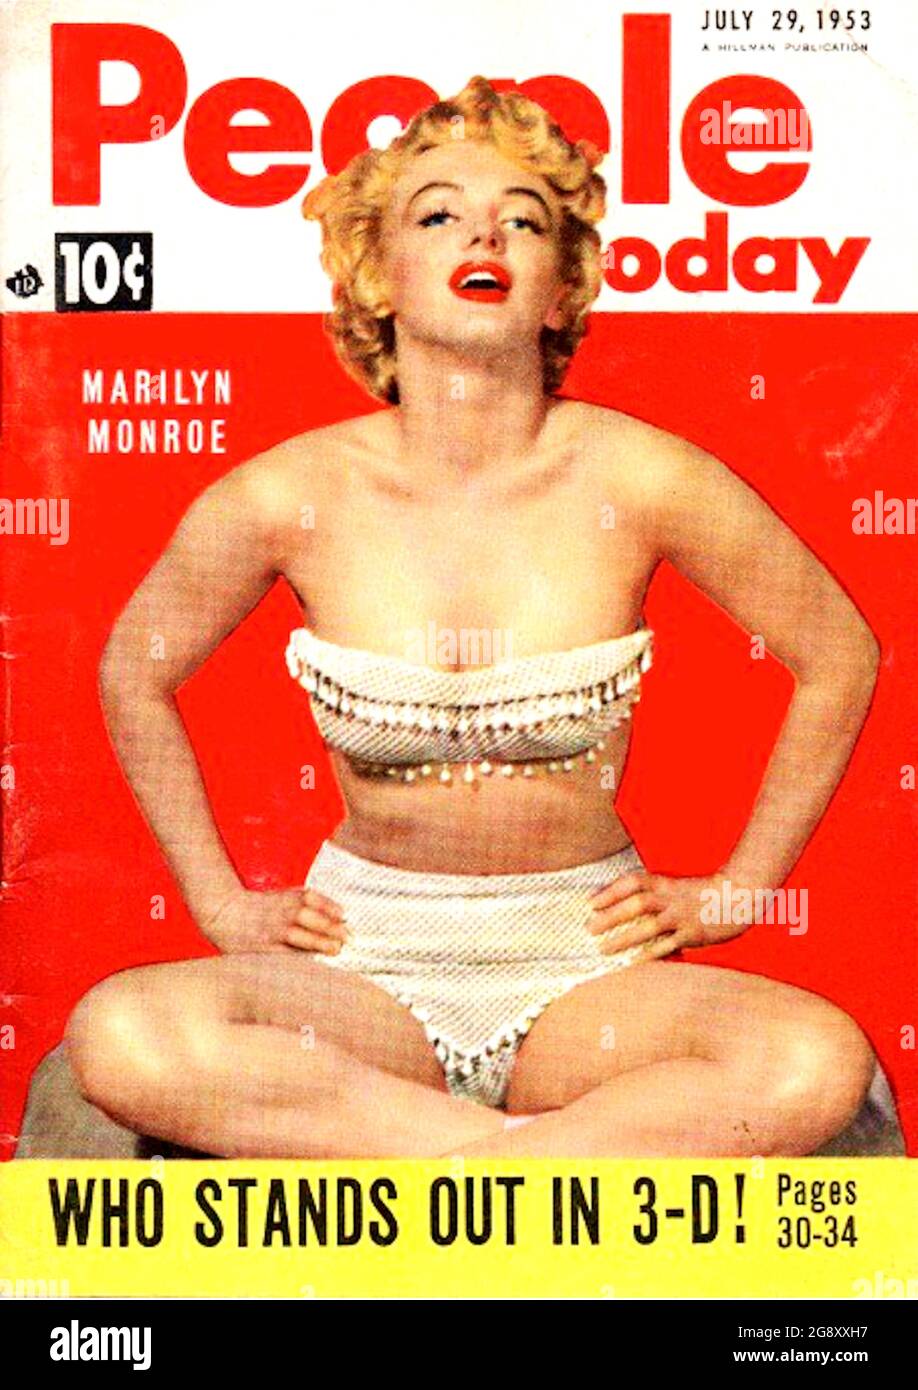 Magazine People Today avec Marilyn Monroe - 1953 Banque D'Images